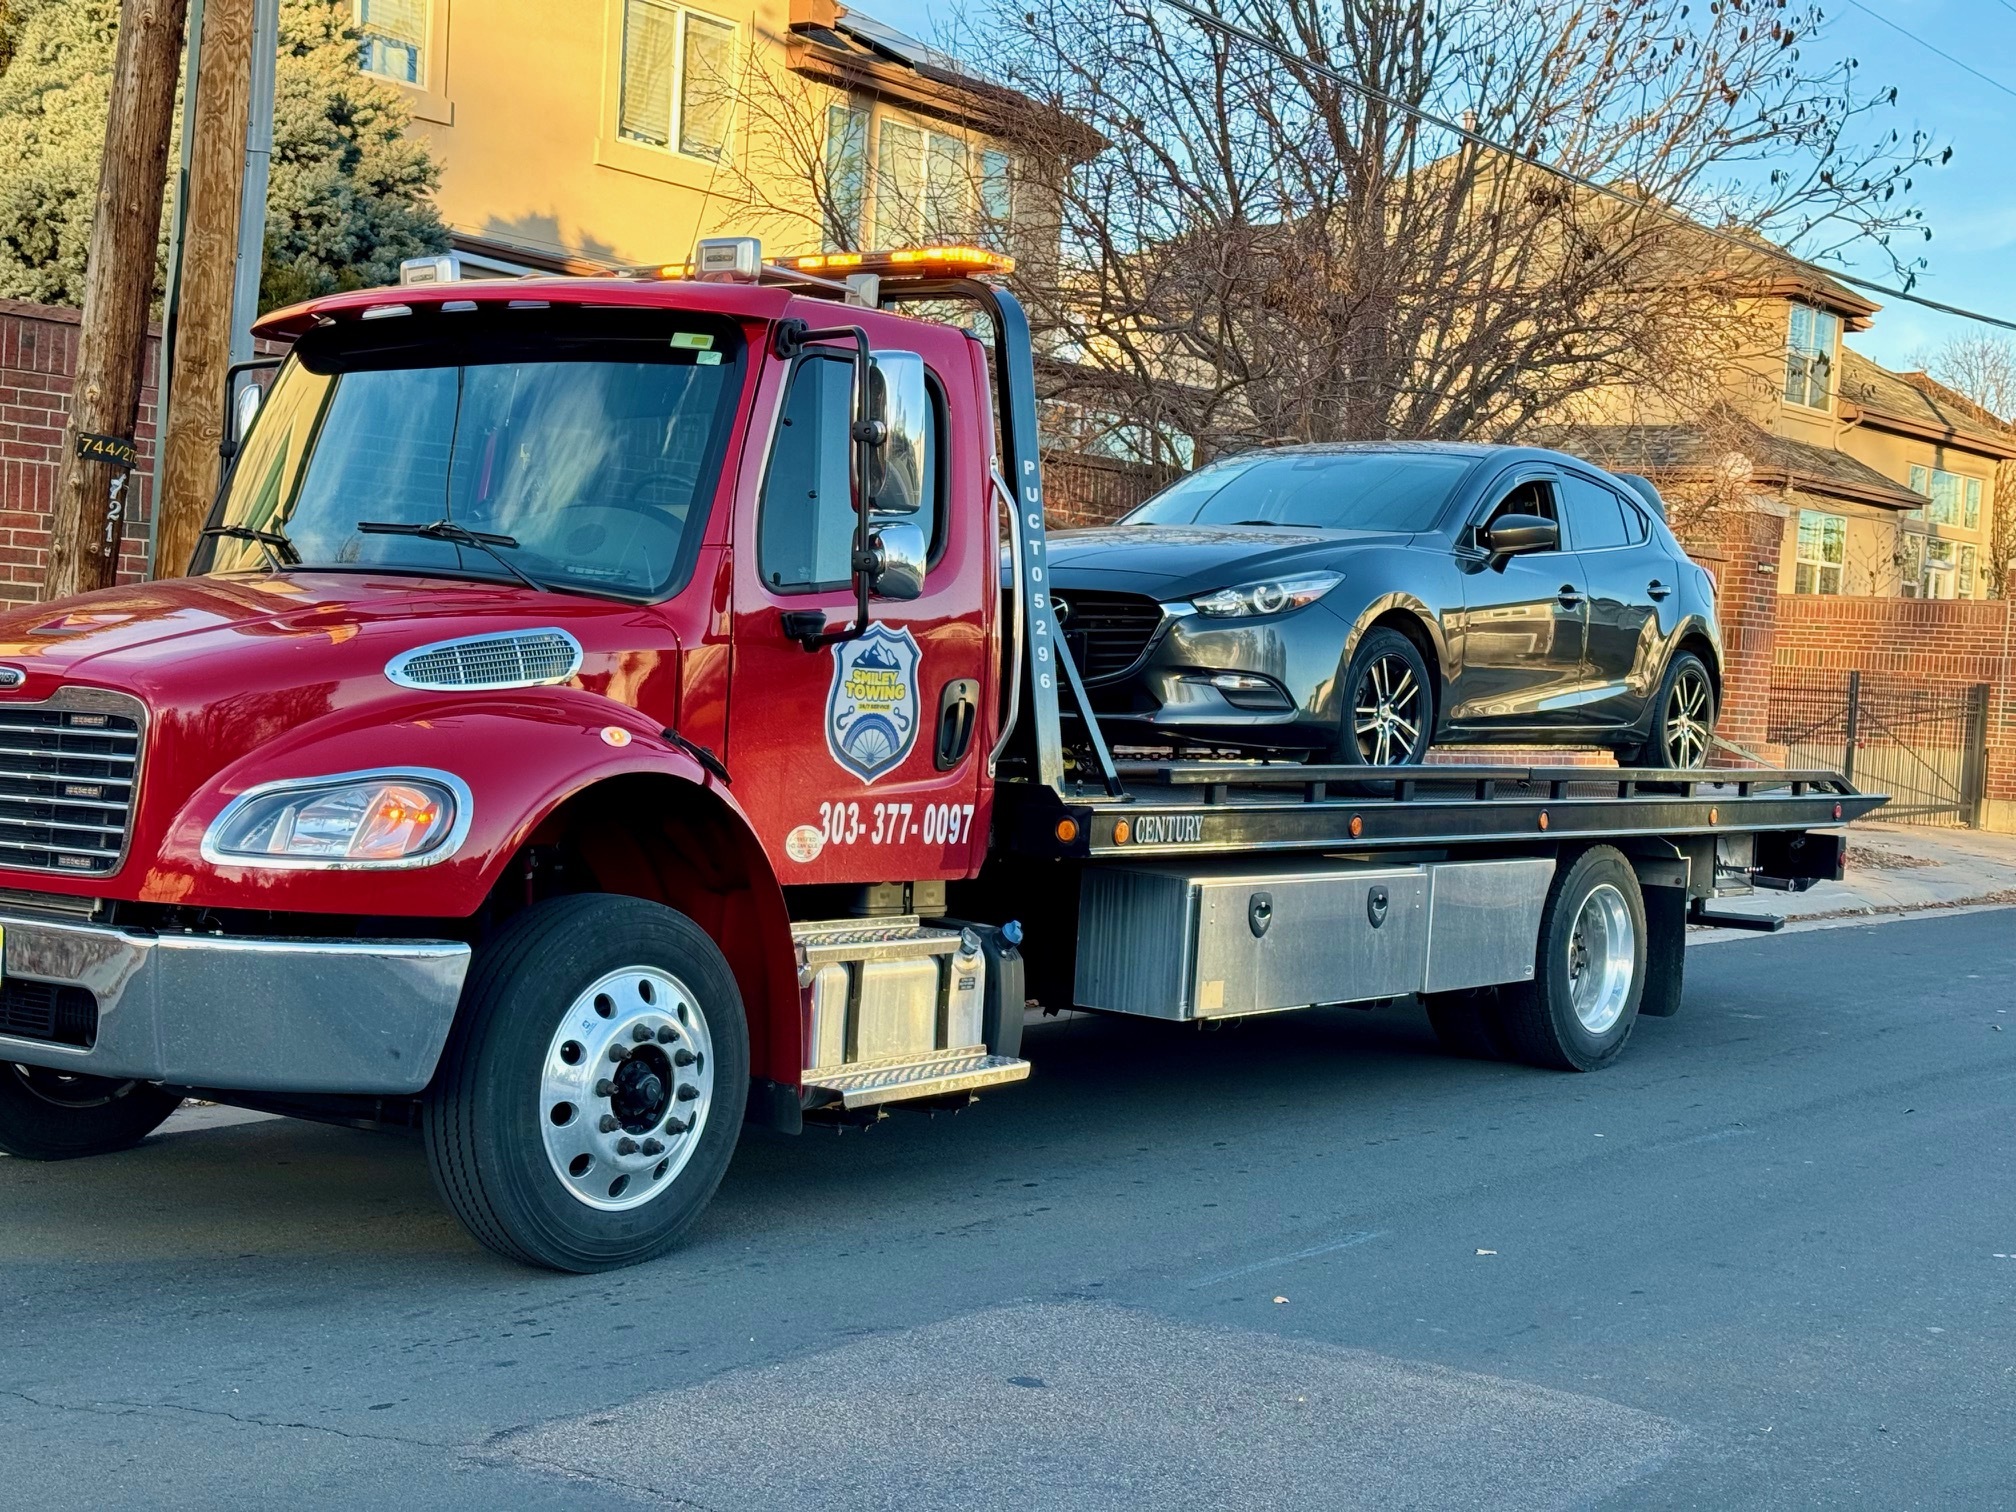 this image shows towing service in Aurora, CO